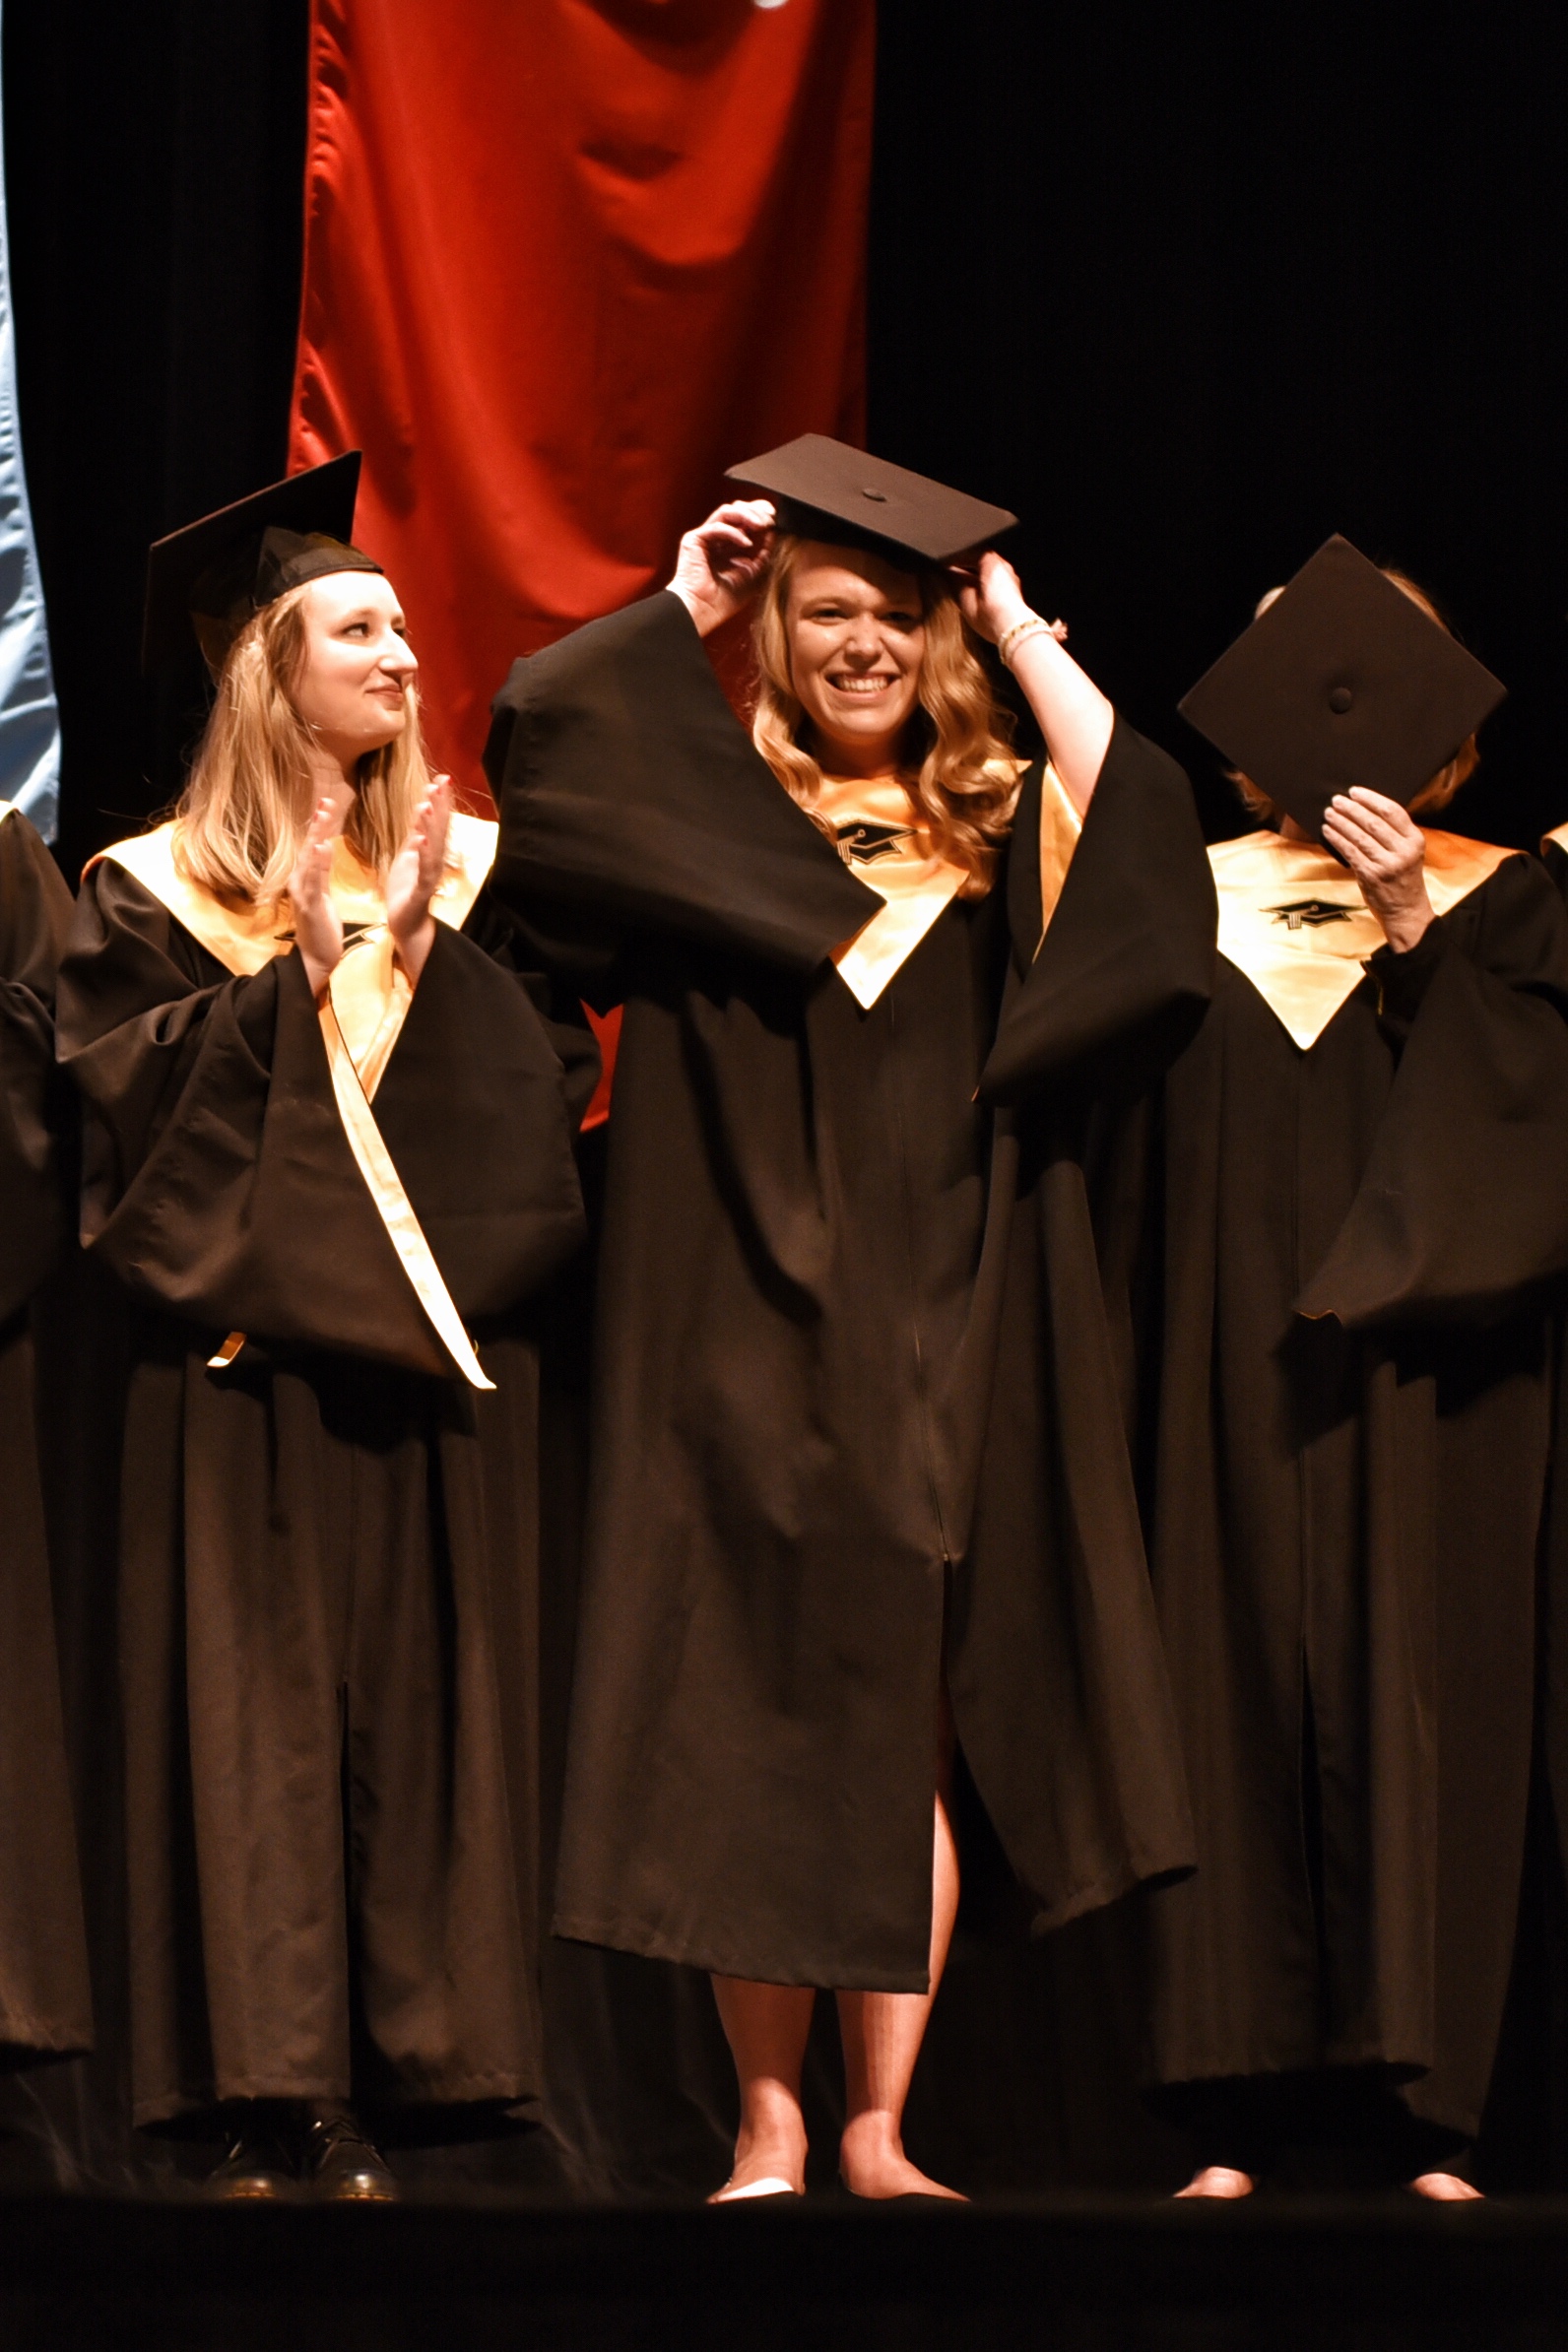 New members of Mortar Board uncover their faces and don mortarboards as they are revealed.